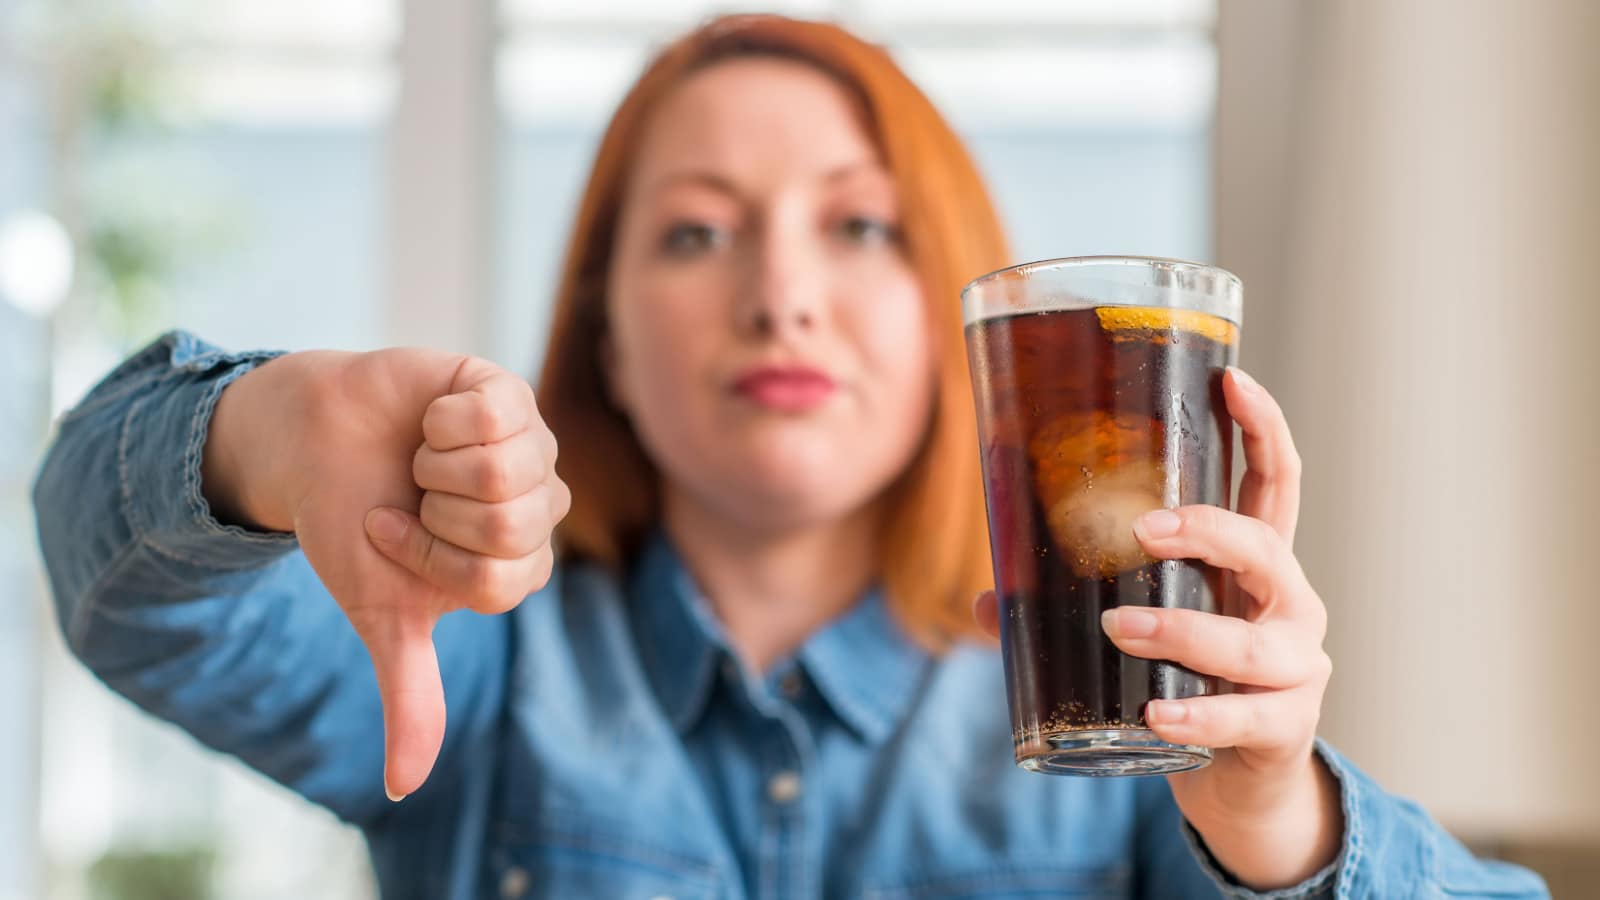 thumbs down no soda bad for you